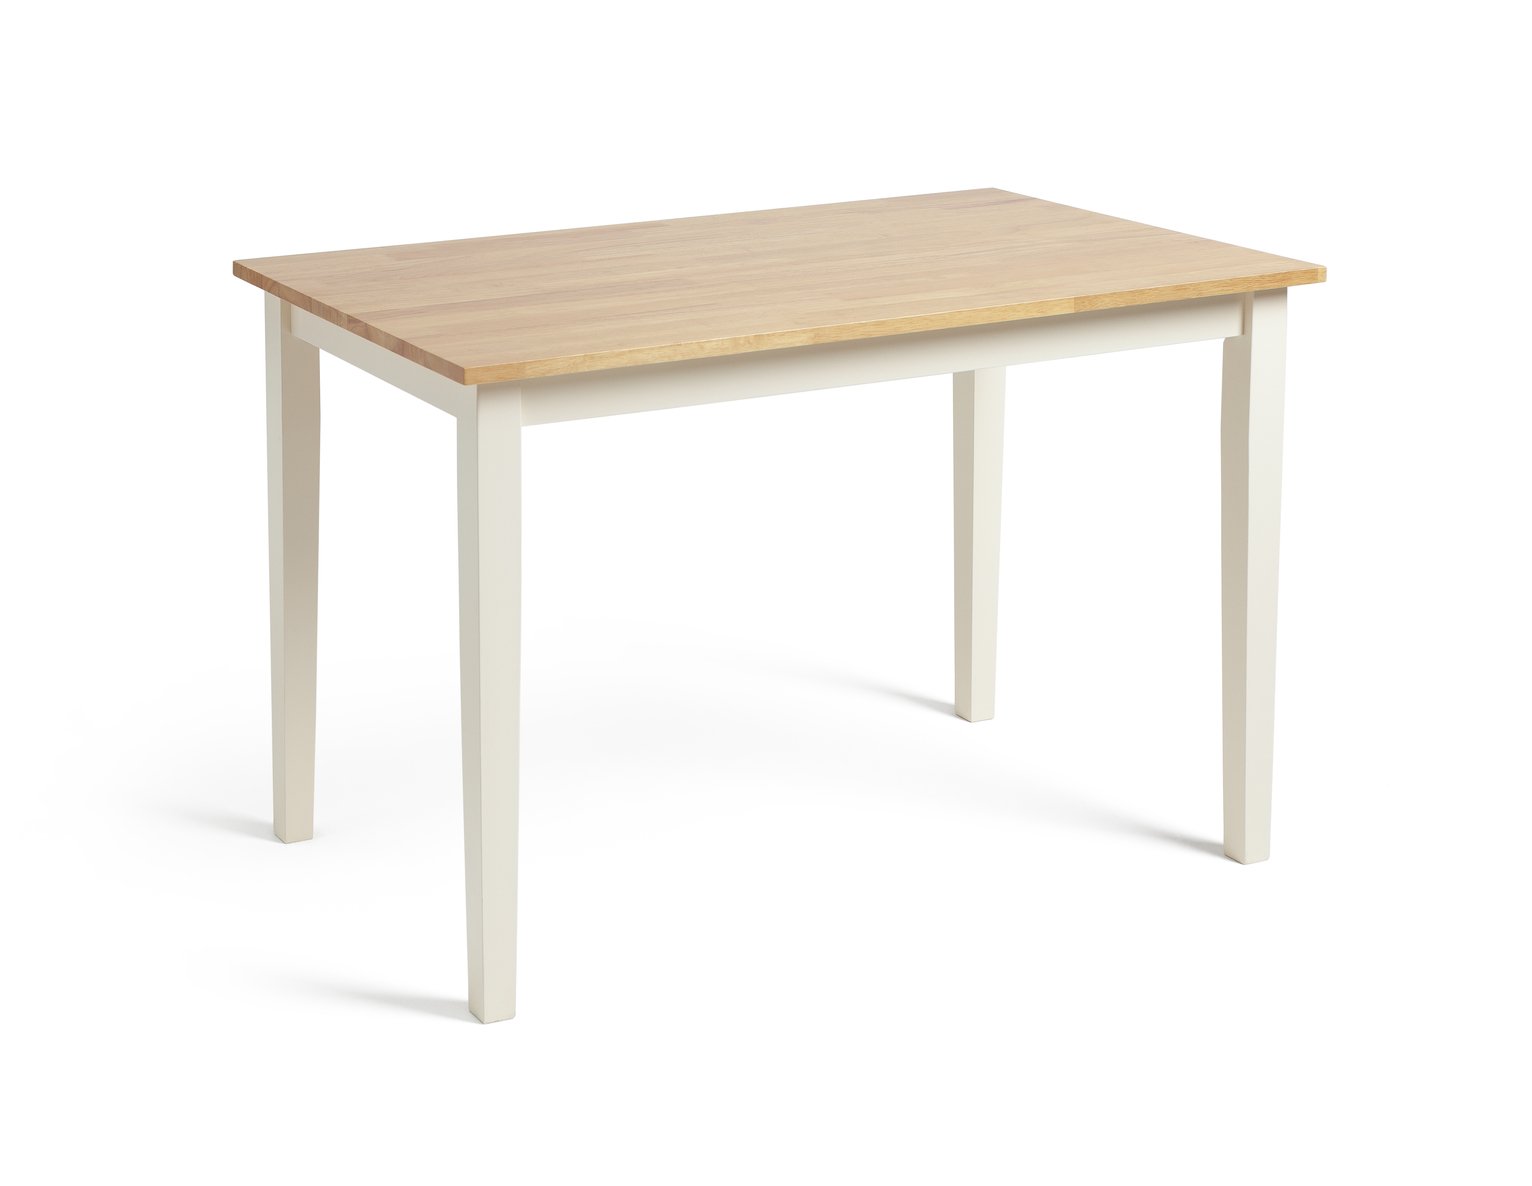 Habitat Chicago Solid Wood Dining Table - Off White